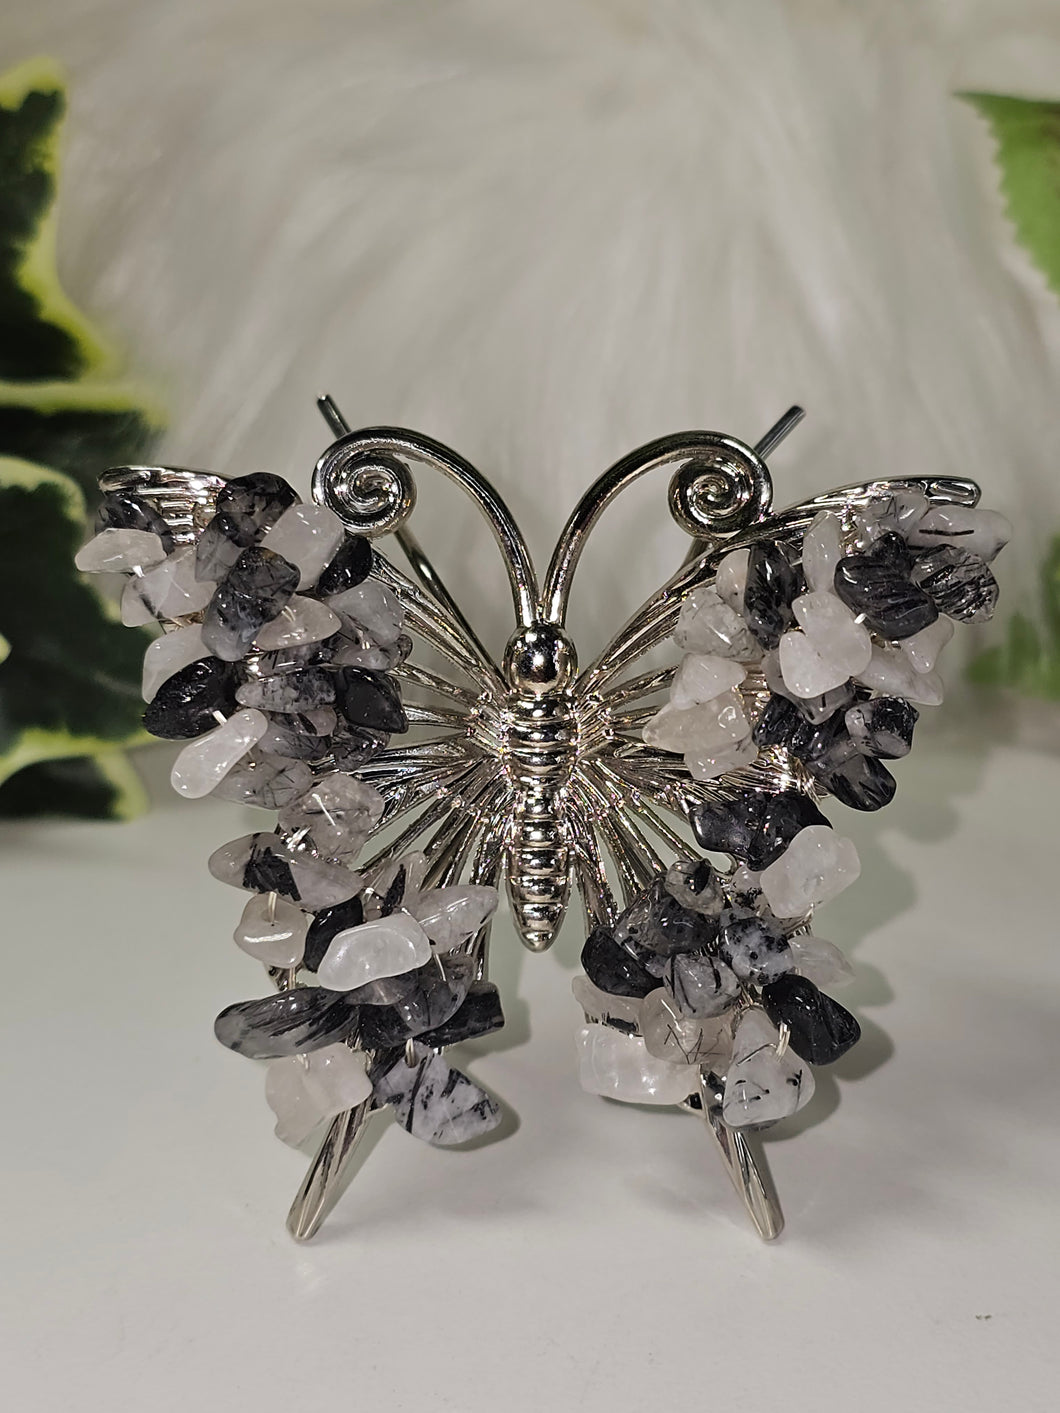 Black Tourmaline in Quartz Chipped Butterfly